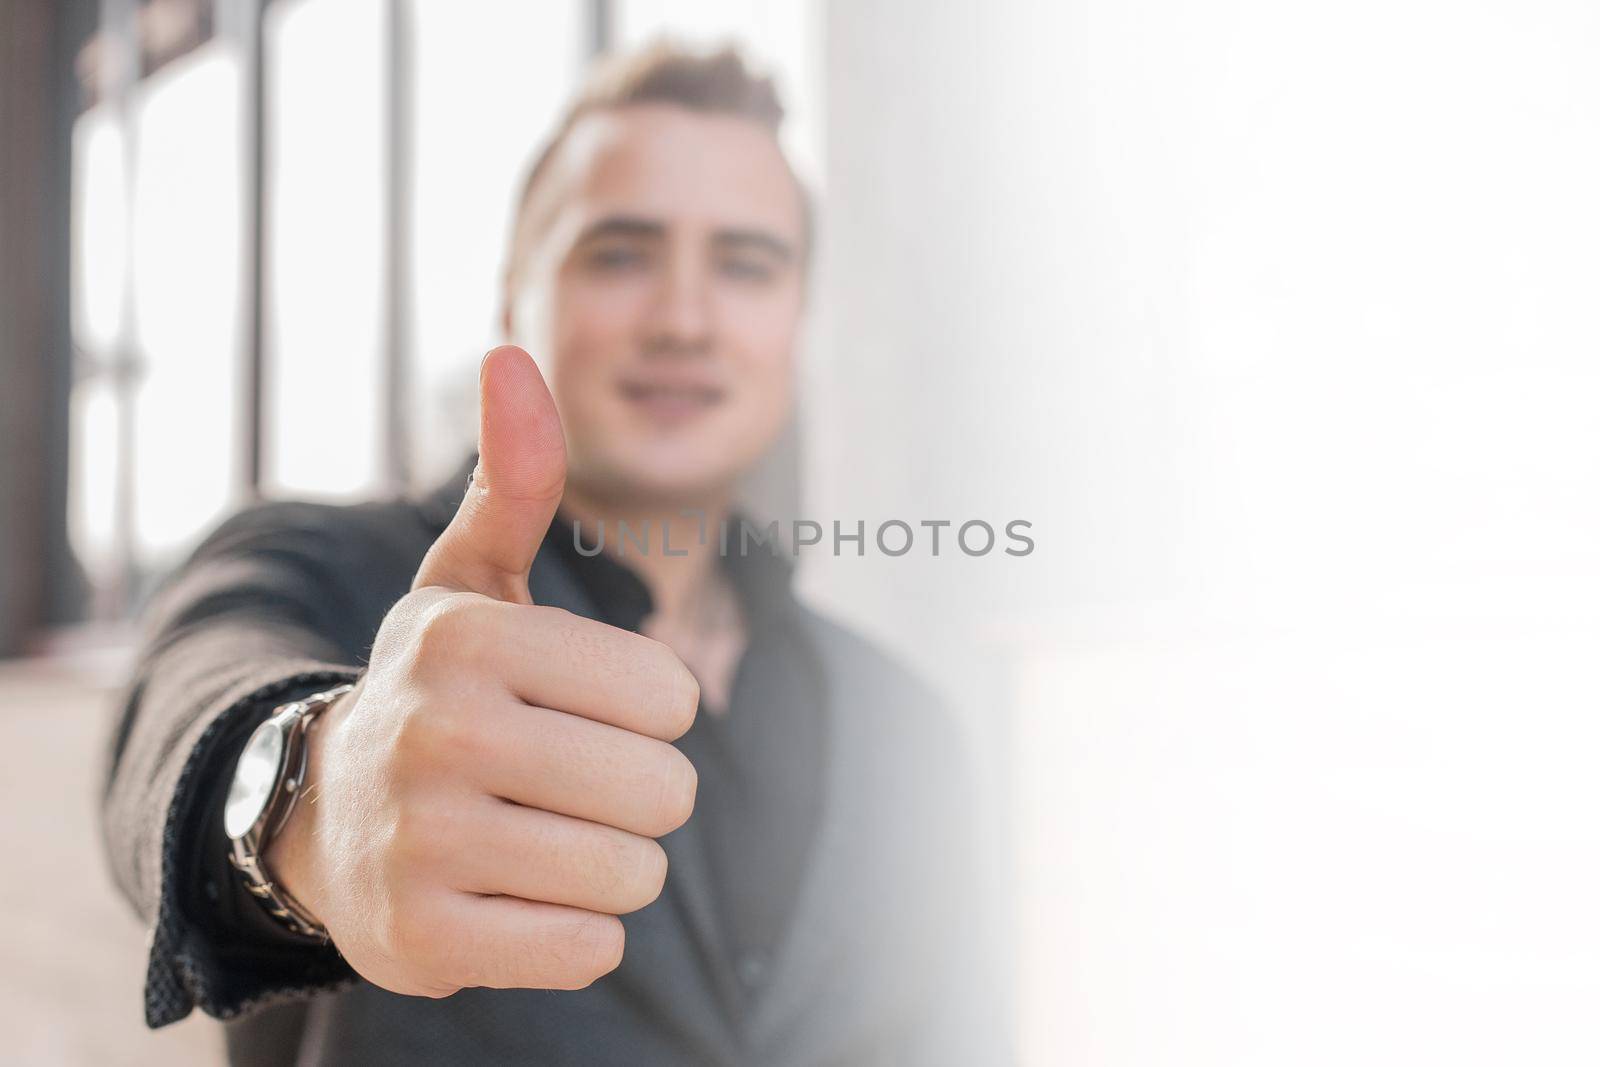 A young man shows a close-up of a thumbs up class against a street outdoor background.